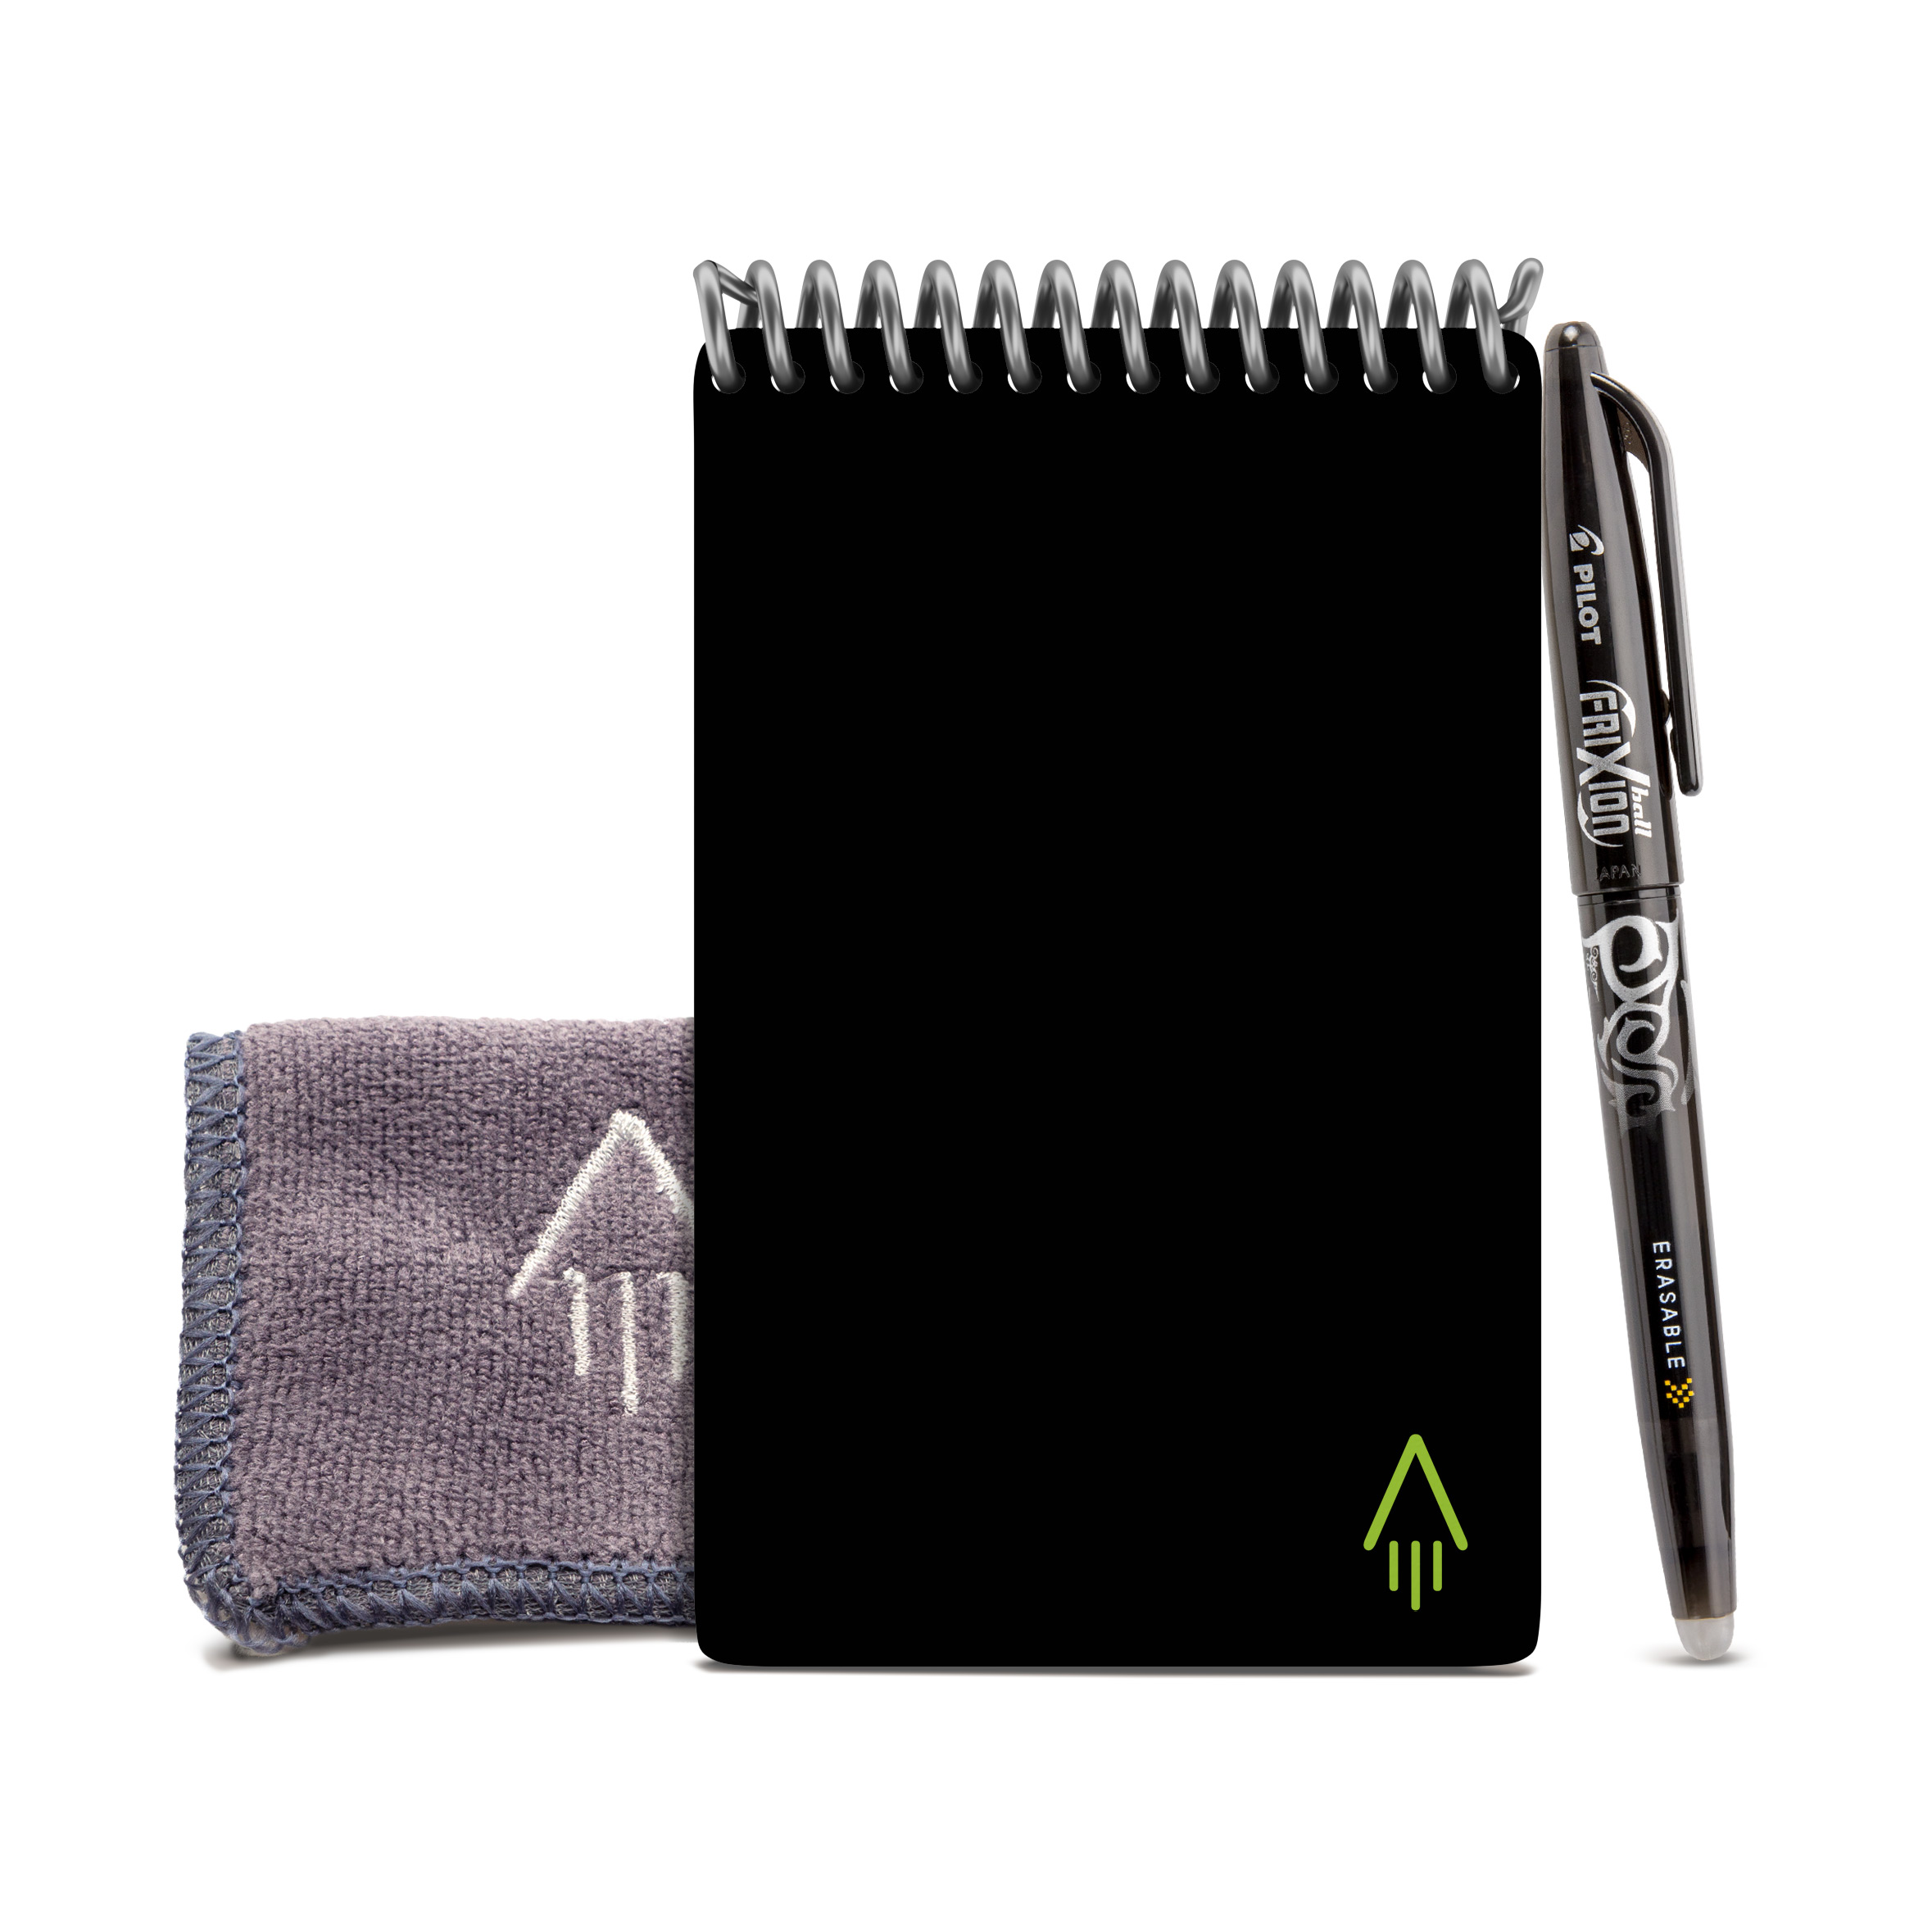 Rocketbook Mini Smart Writing Pad, Dot-Grid, 48 Pages, 3.5" x 5.5", Black - image 1 of 9